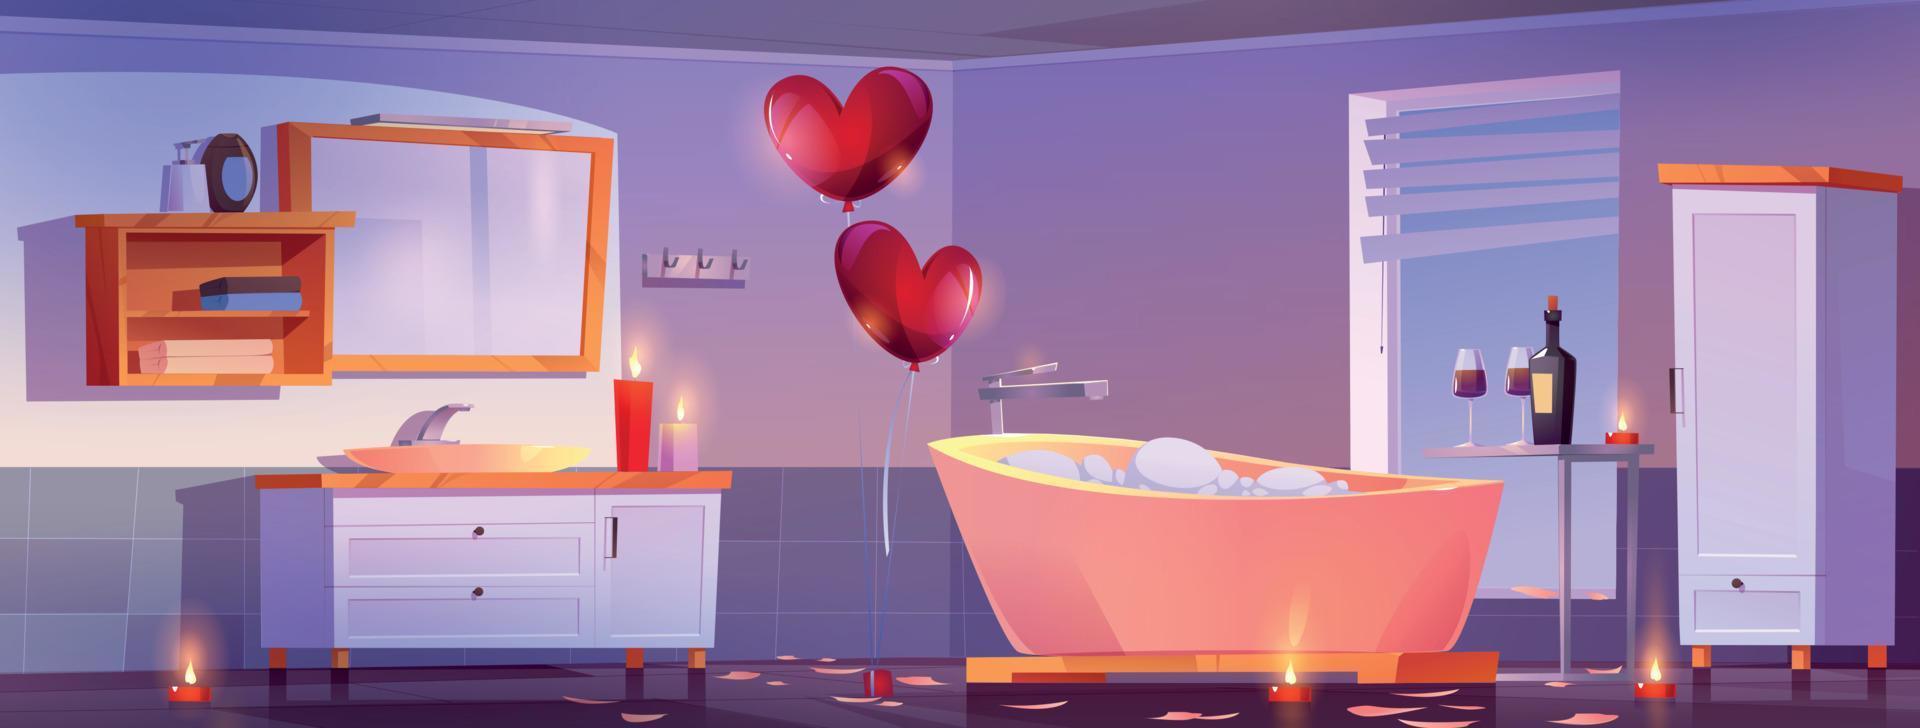 Romantic bathroom atmosphere for couple dating vector